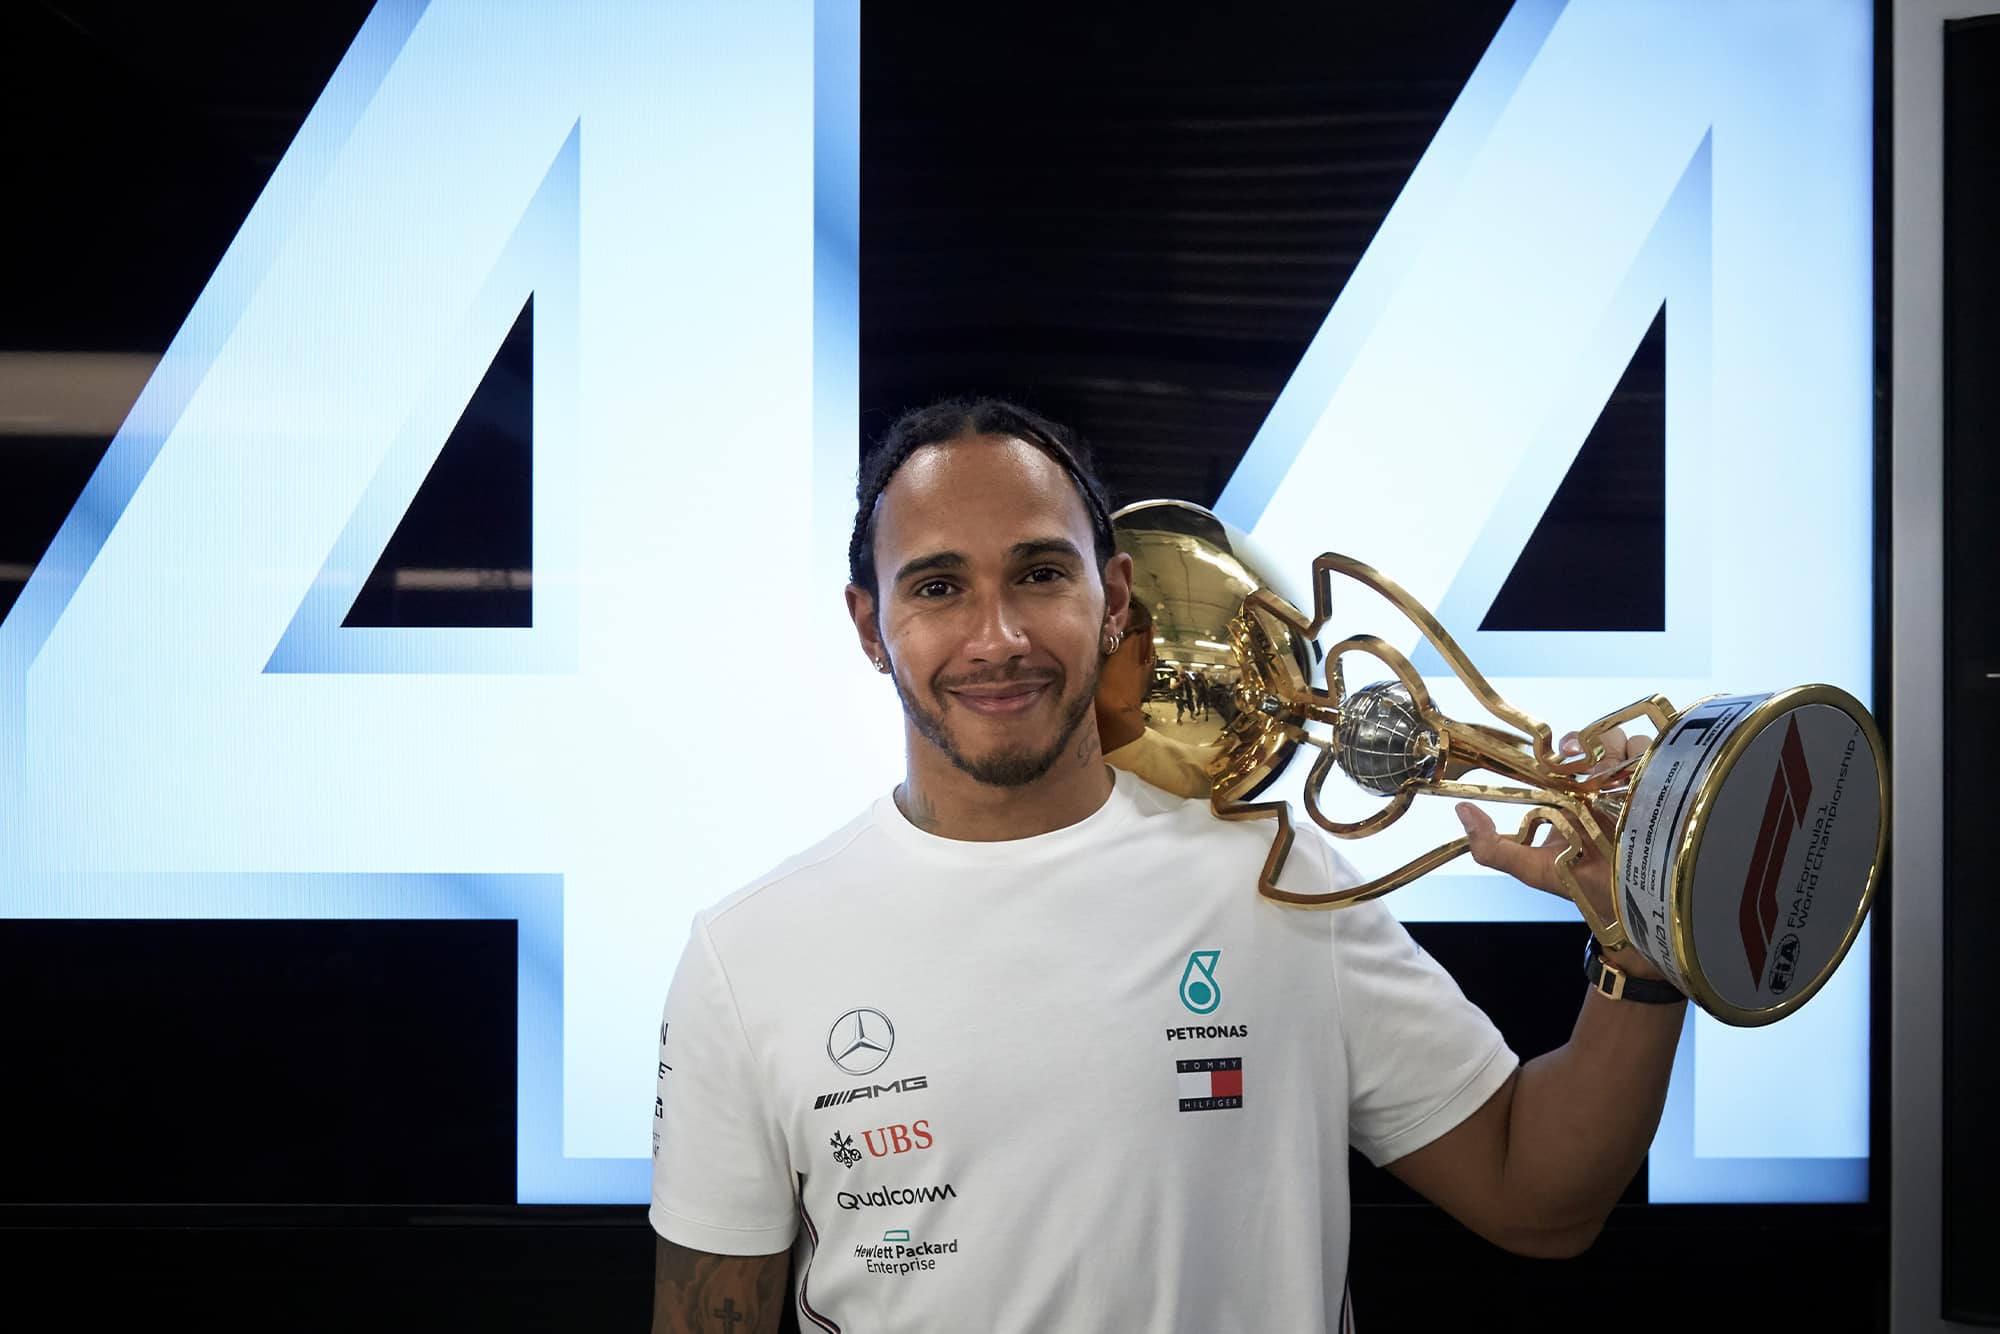 Lewis Hamilton with the winning trophy after the 2019 Russian Grand Prix